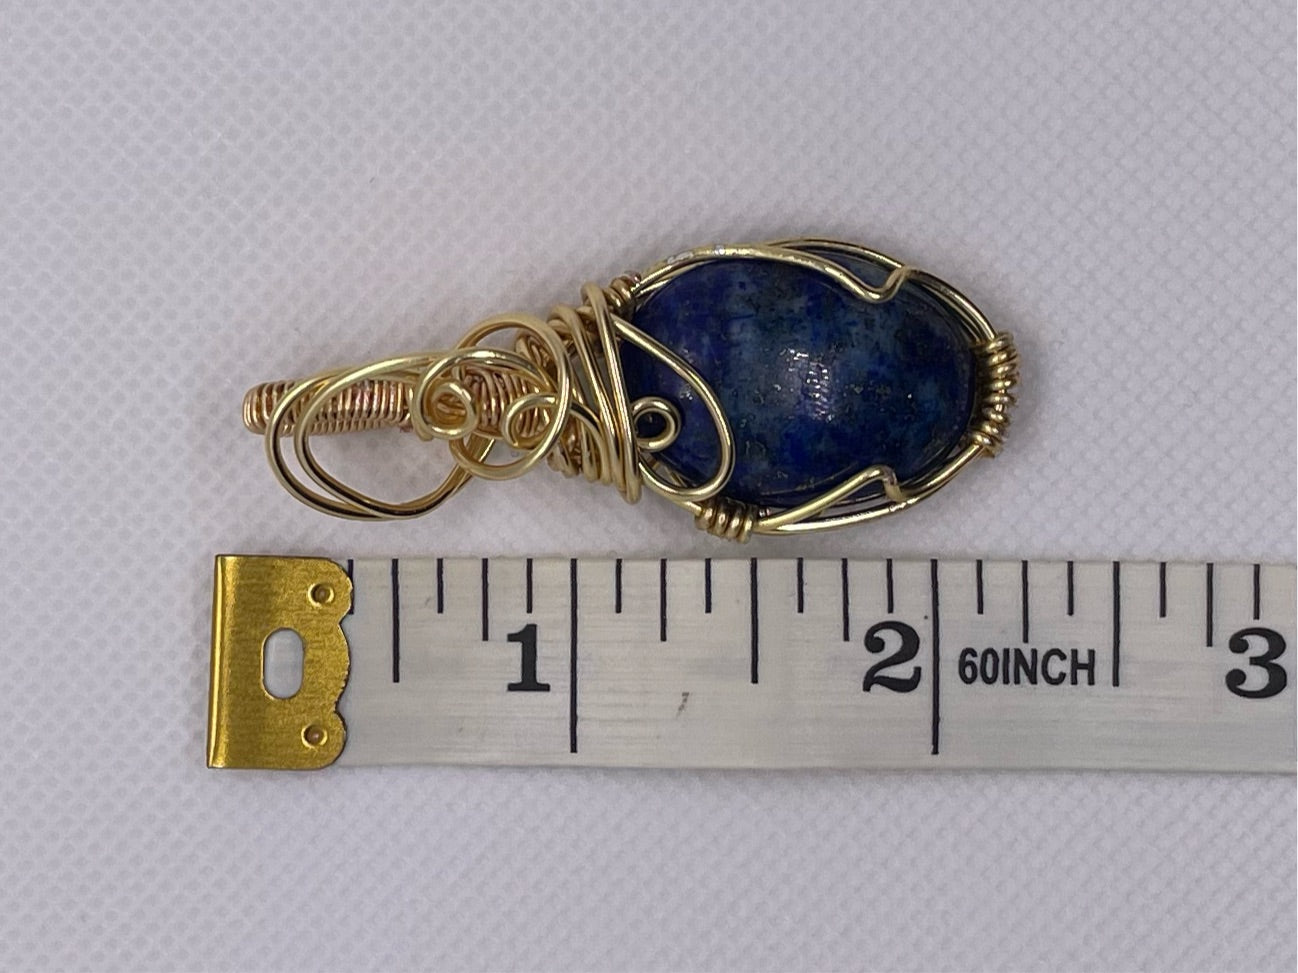 Silver pendant with lapis